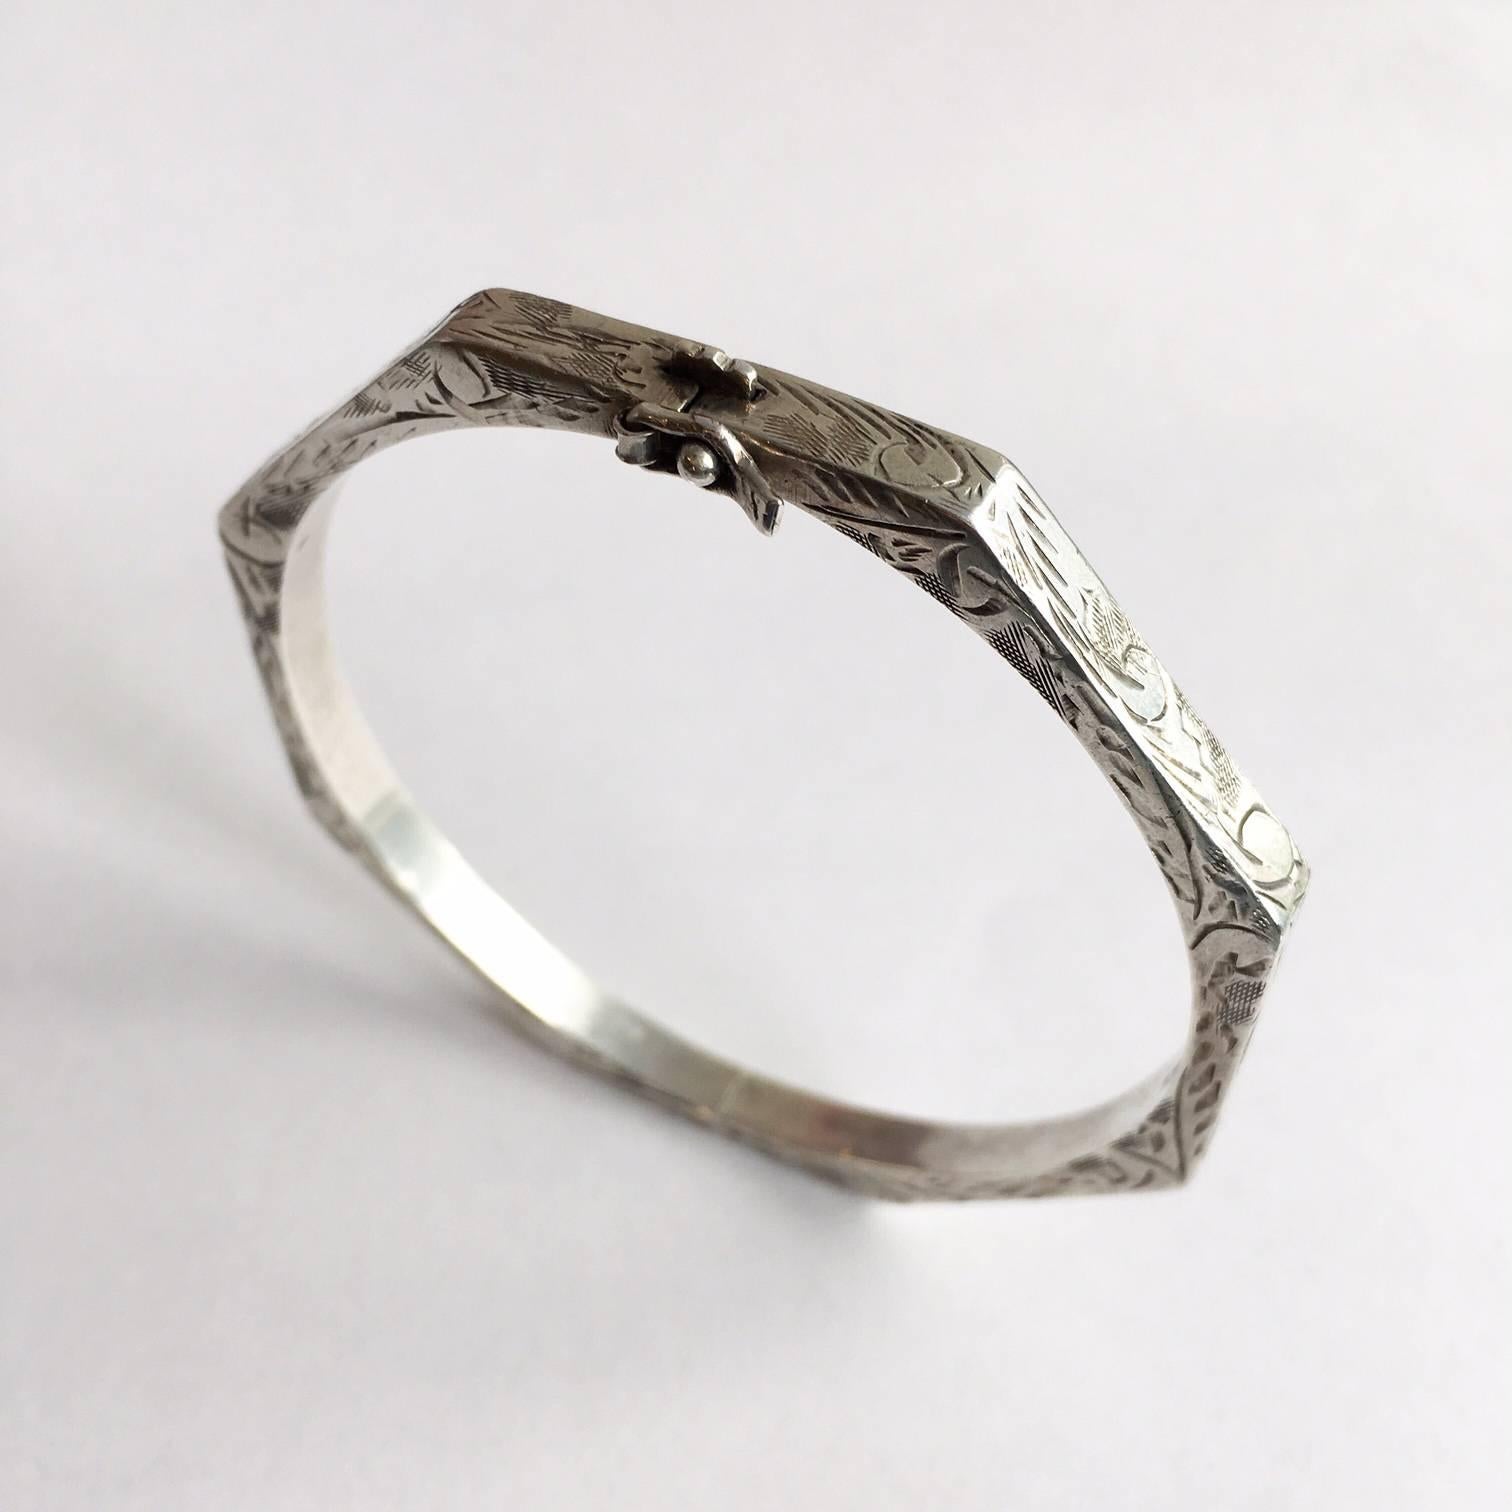 This stylish silver bangle is a bit different with its octagonal shape. The surface is etched with a delicate, stylised foliate design. It opens with a catch and hinge, so getting it on and off is no trouble. The closure has a satisfying click. It